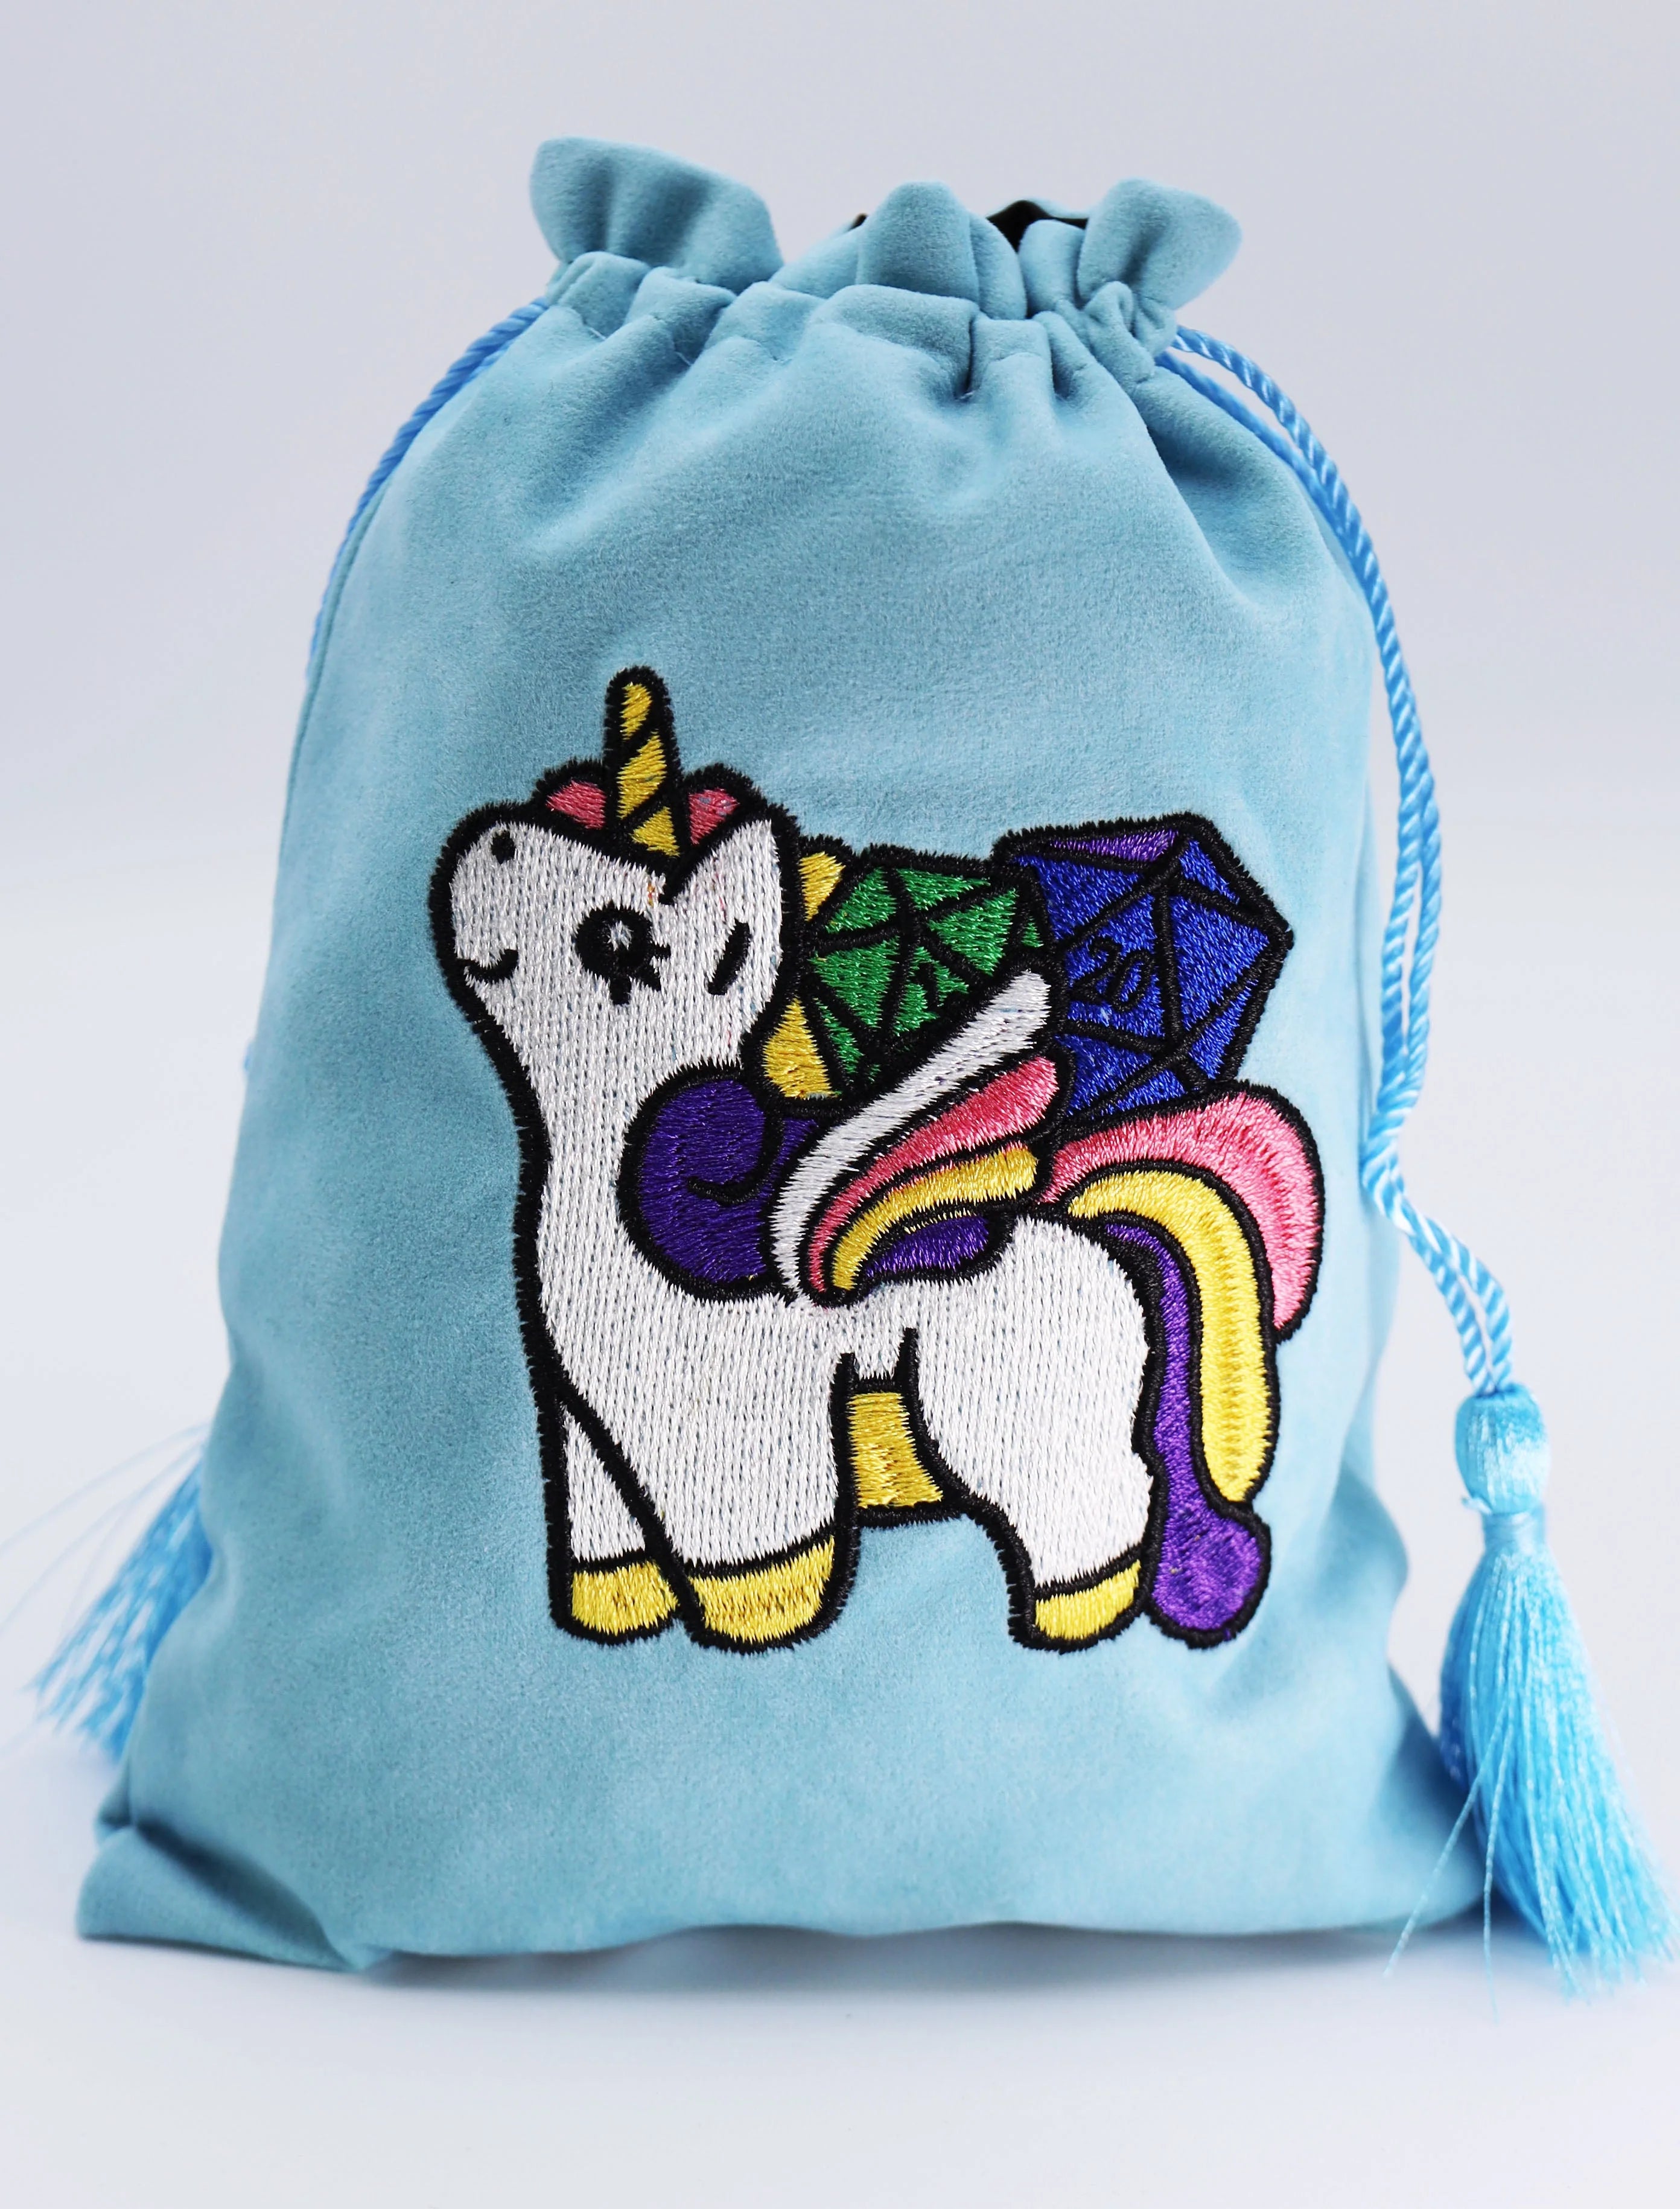 DICE BAG - UNICORN Dice & Counters Foam Brain Games    | Red Claw Gaming